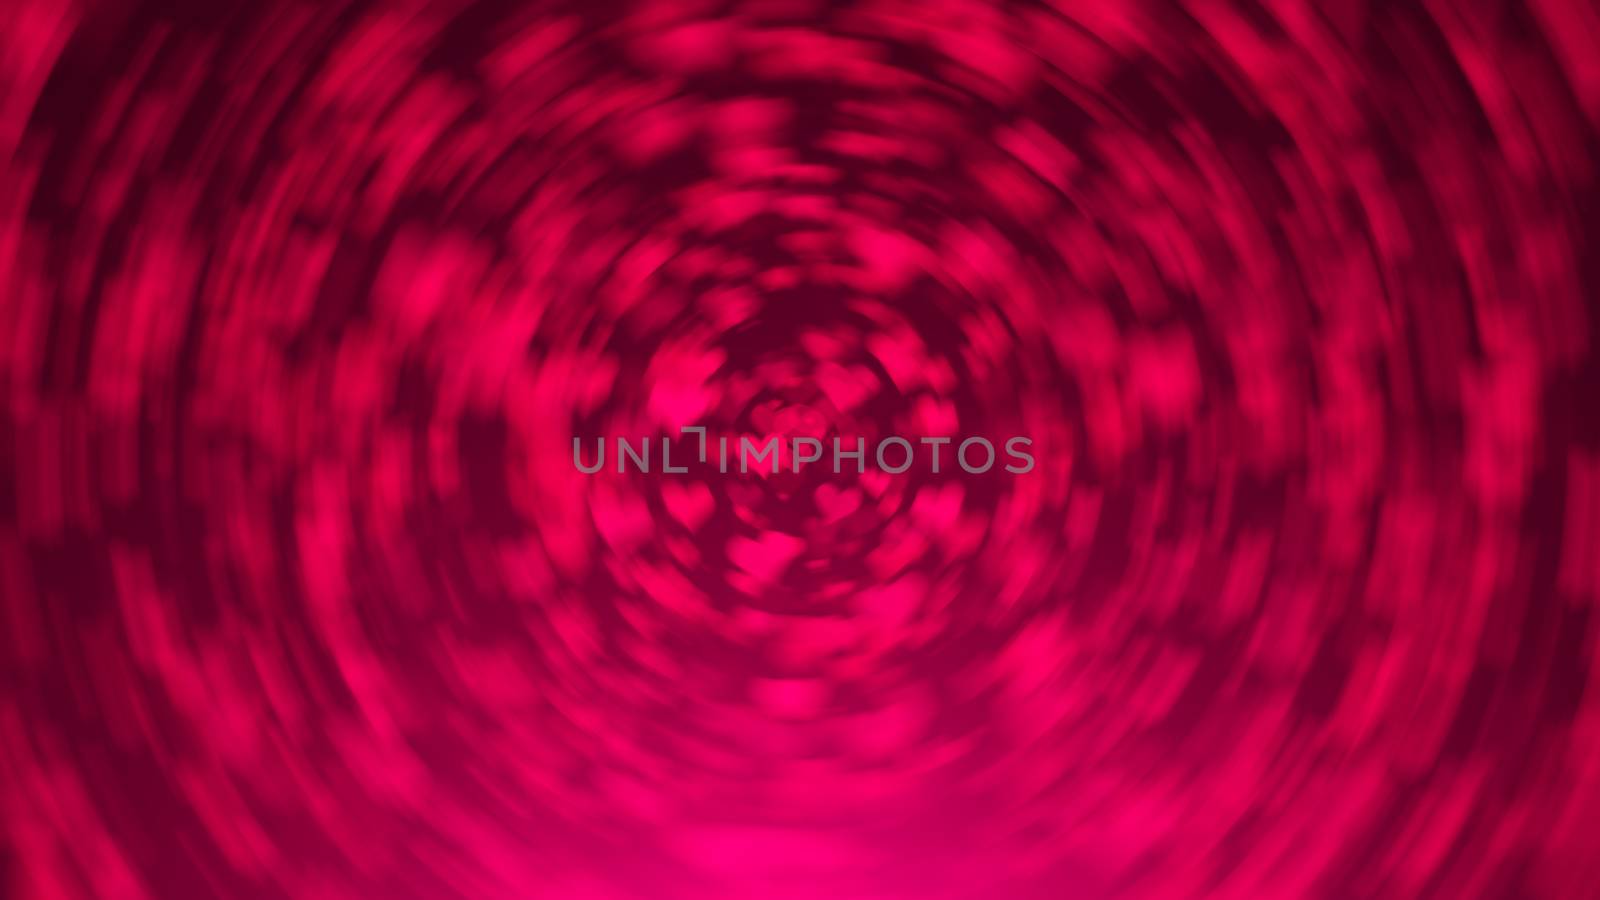 Abstract background with radial blur hearts. Digital illustration by nolimit046